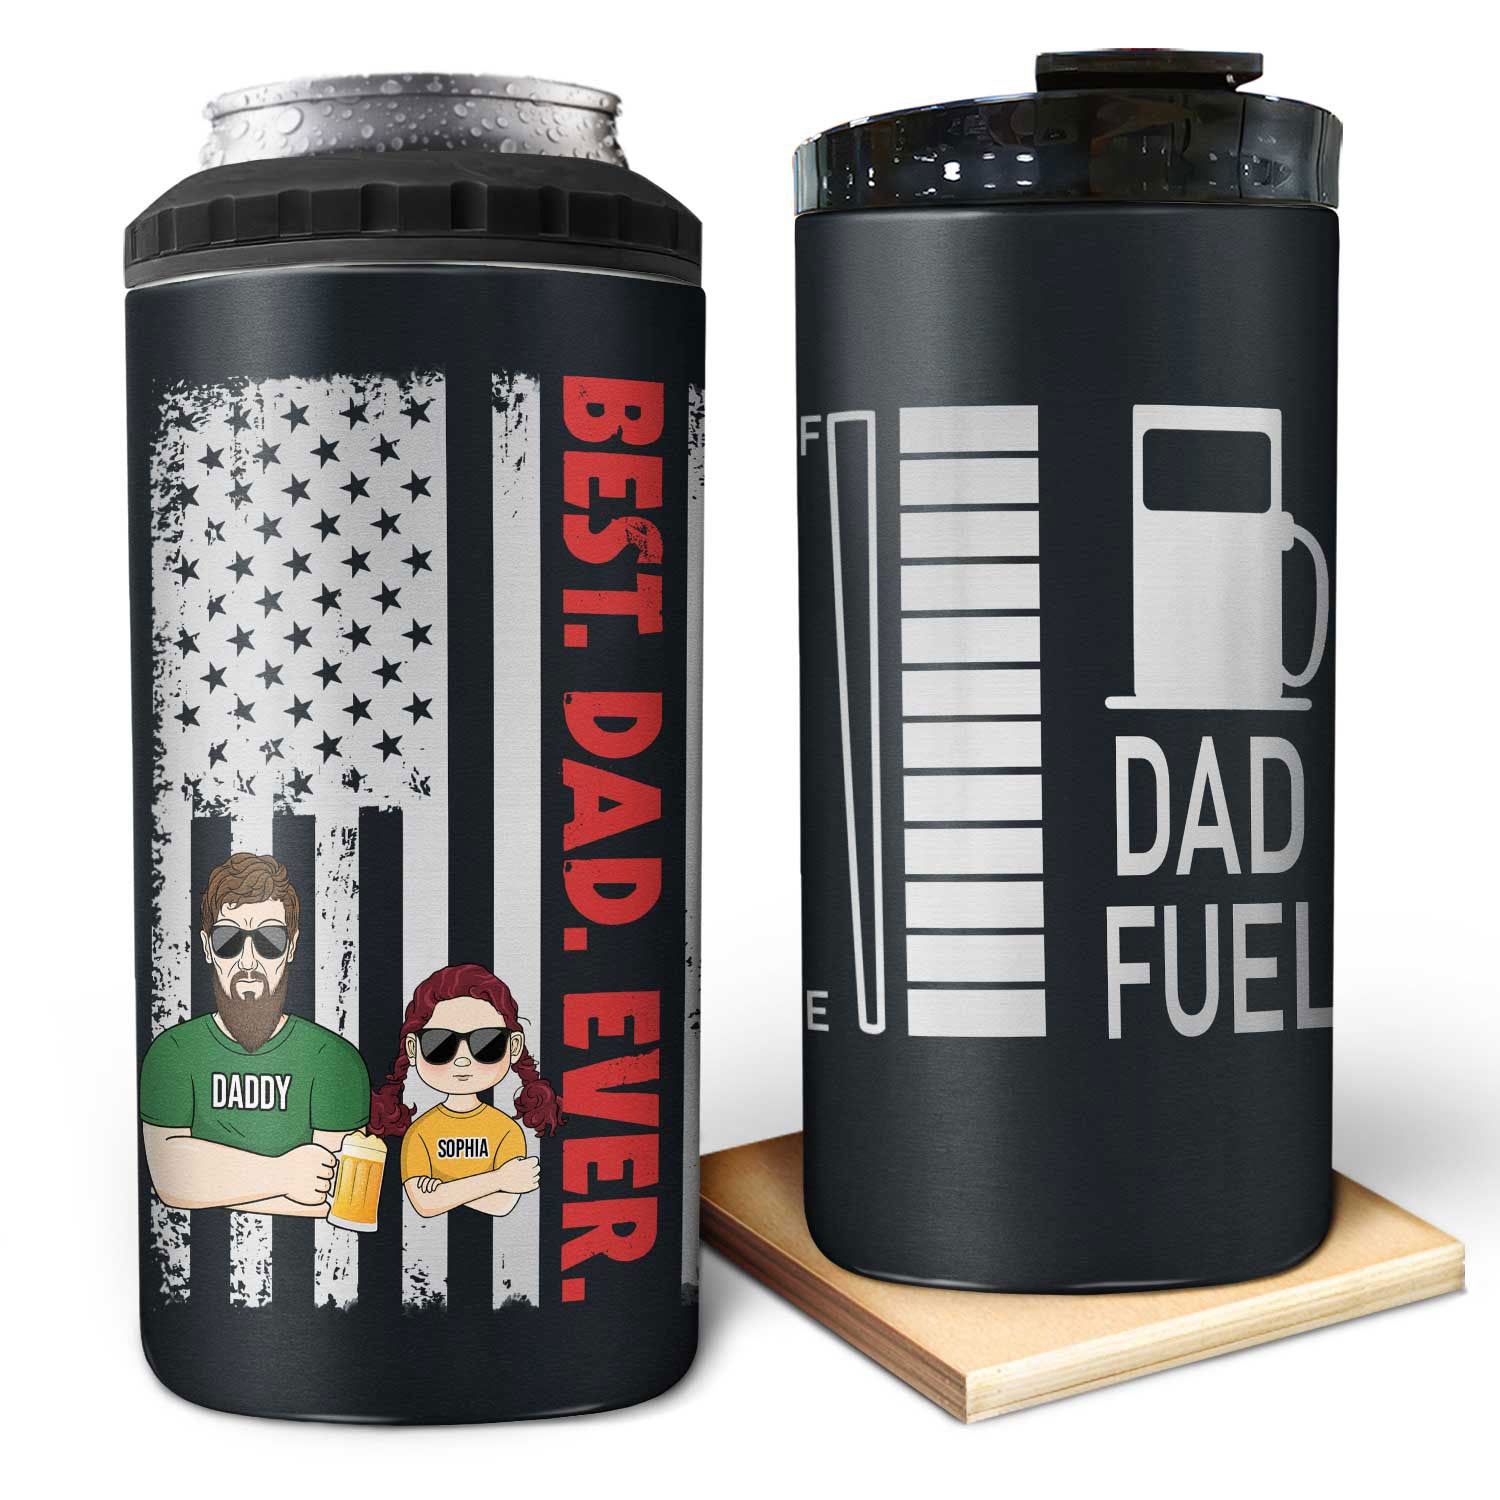 Dad Fuel - Birthday, Cool Gift For Daddy, Father, Grandpa, Grandfather, Husband, Men - Personalized Custom 4 In 1 Can Cooler Tumbler